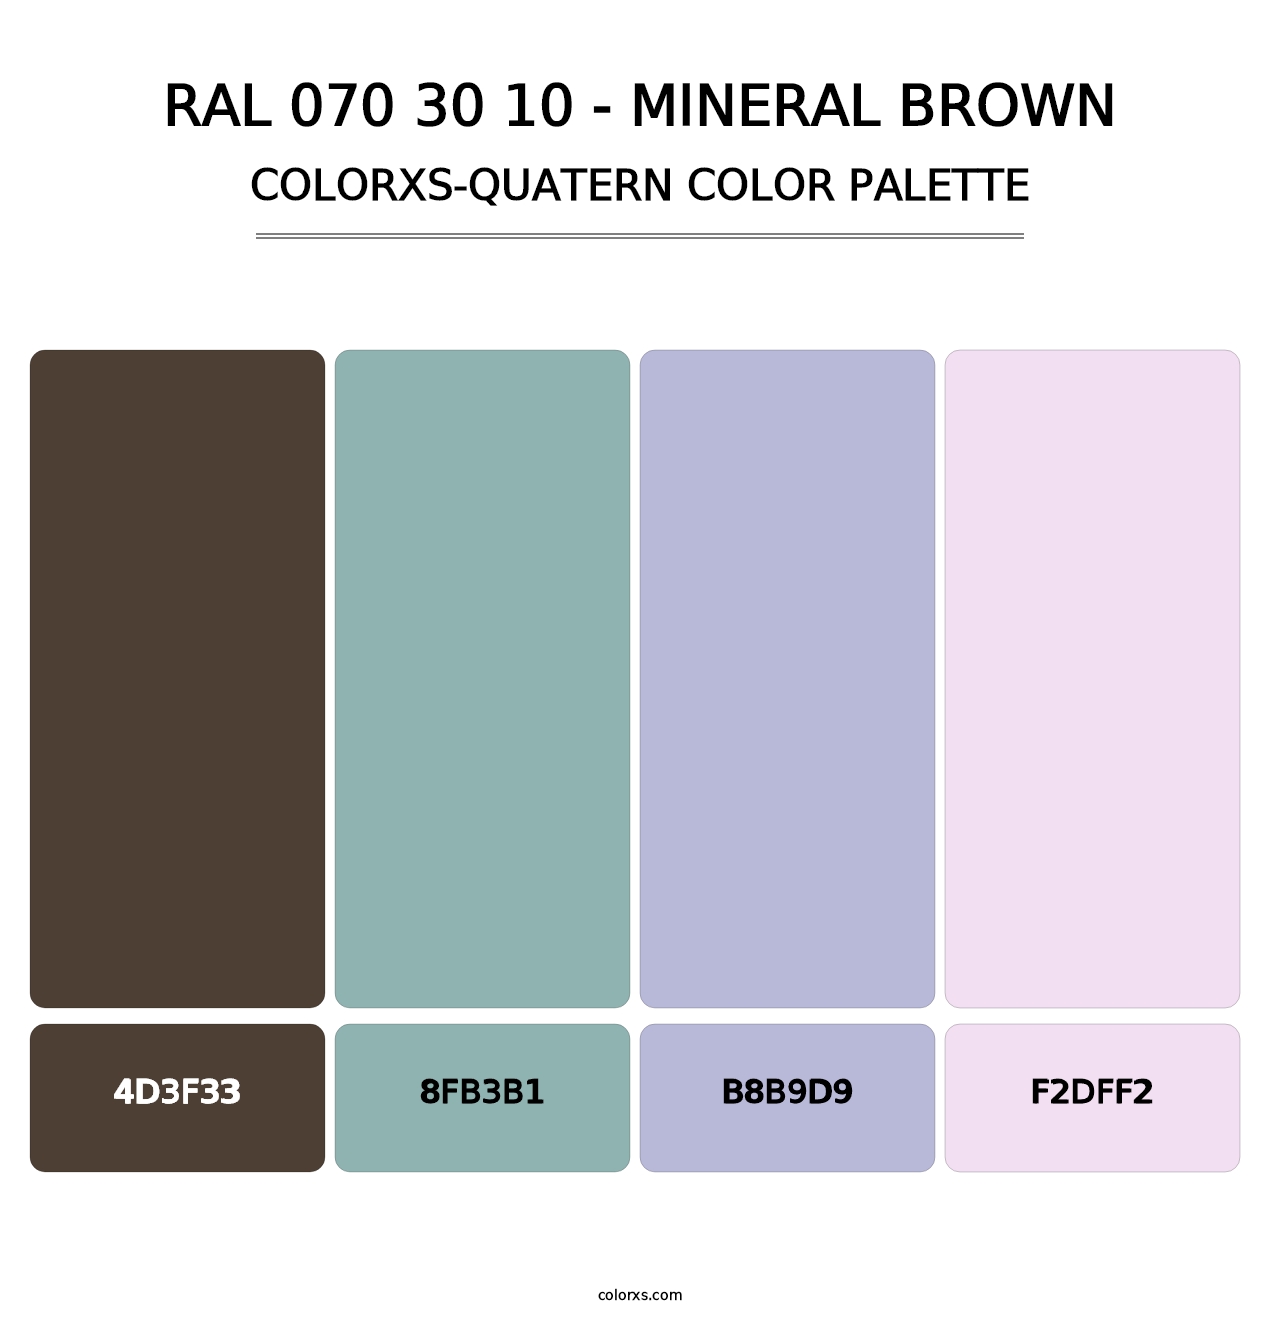 RAL 070 30 10 - Mineral Brown - Colorxs Quatern Palette